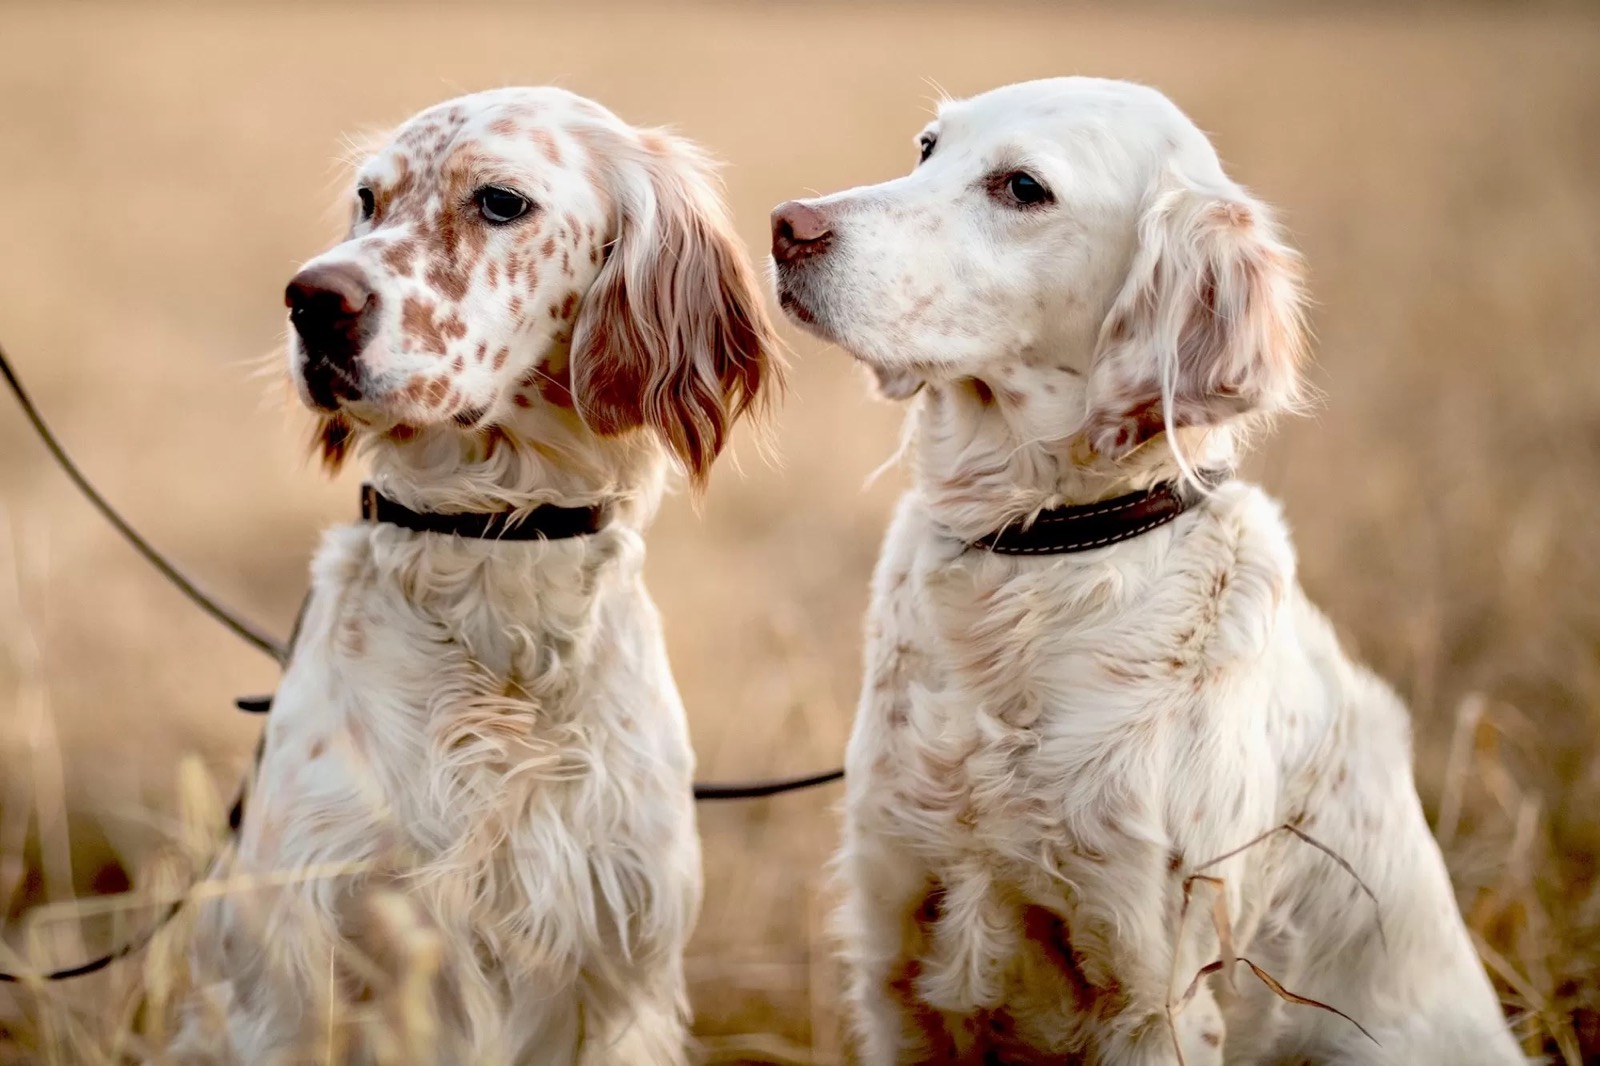 7 in 10 People Can’t Identity More Than 15 of These Dog Breeds 🐕 — Let’s See If You Can Do It English Setters